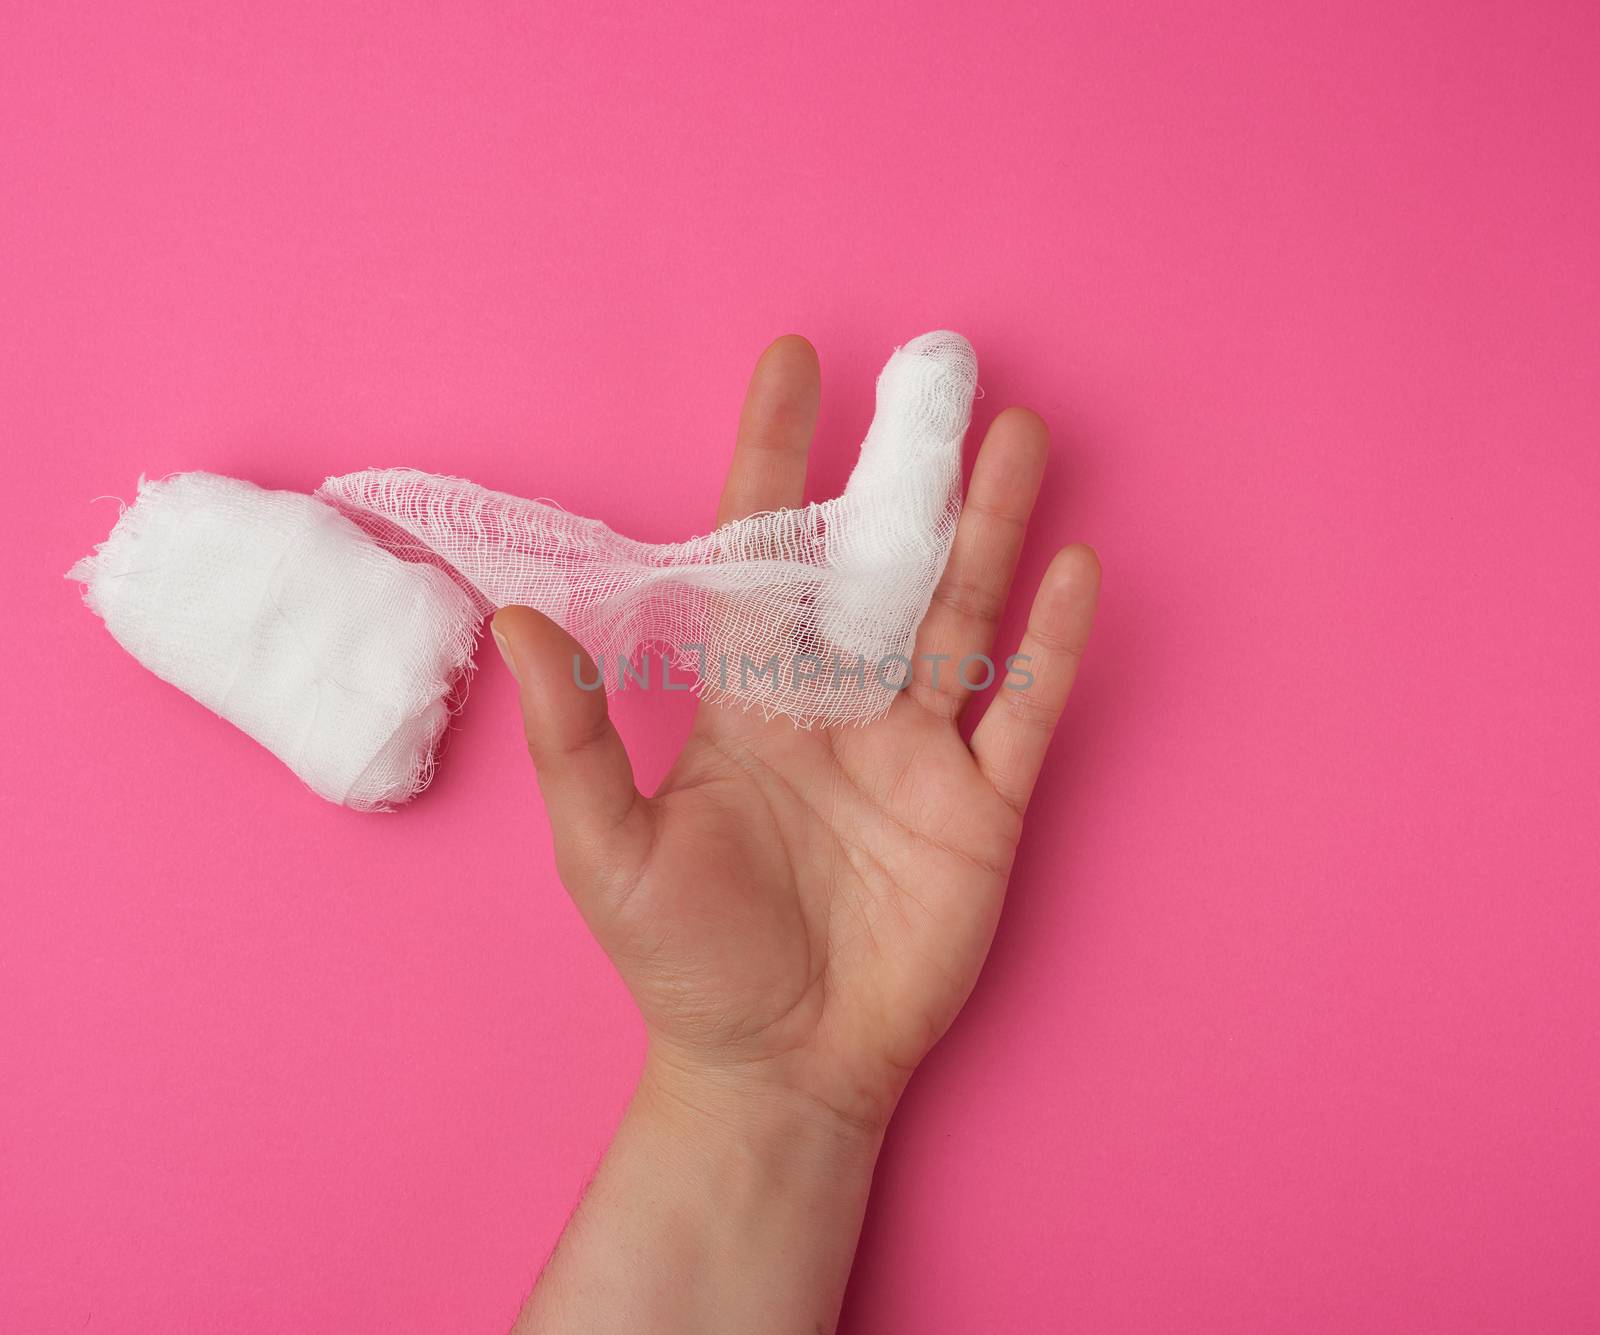 rewound middle finger with white medical sterile gauze bandage by ndanko